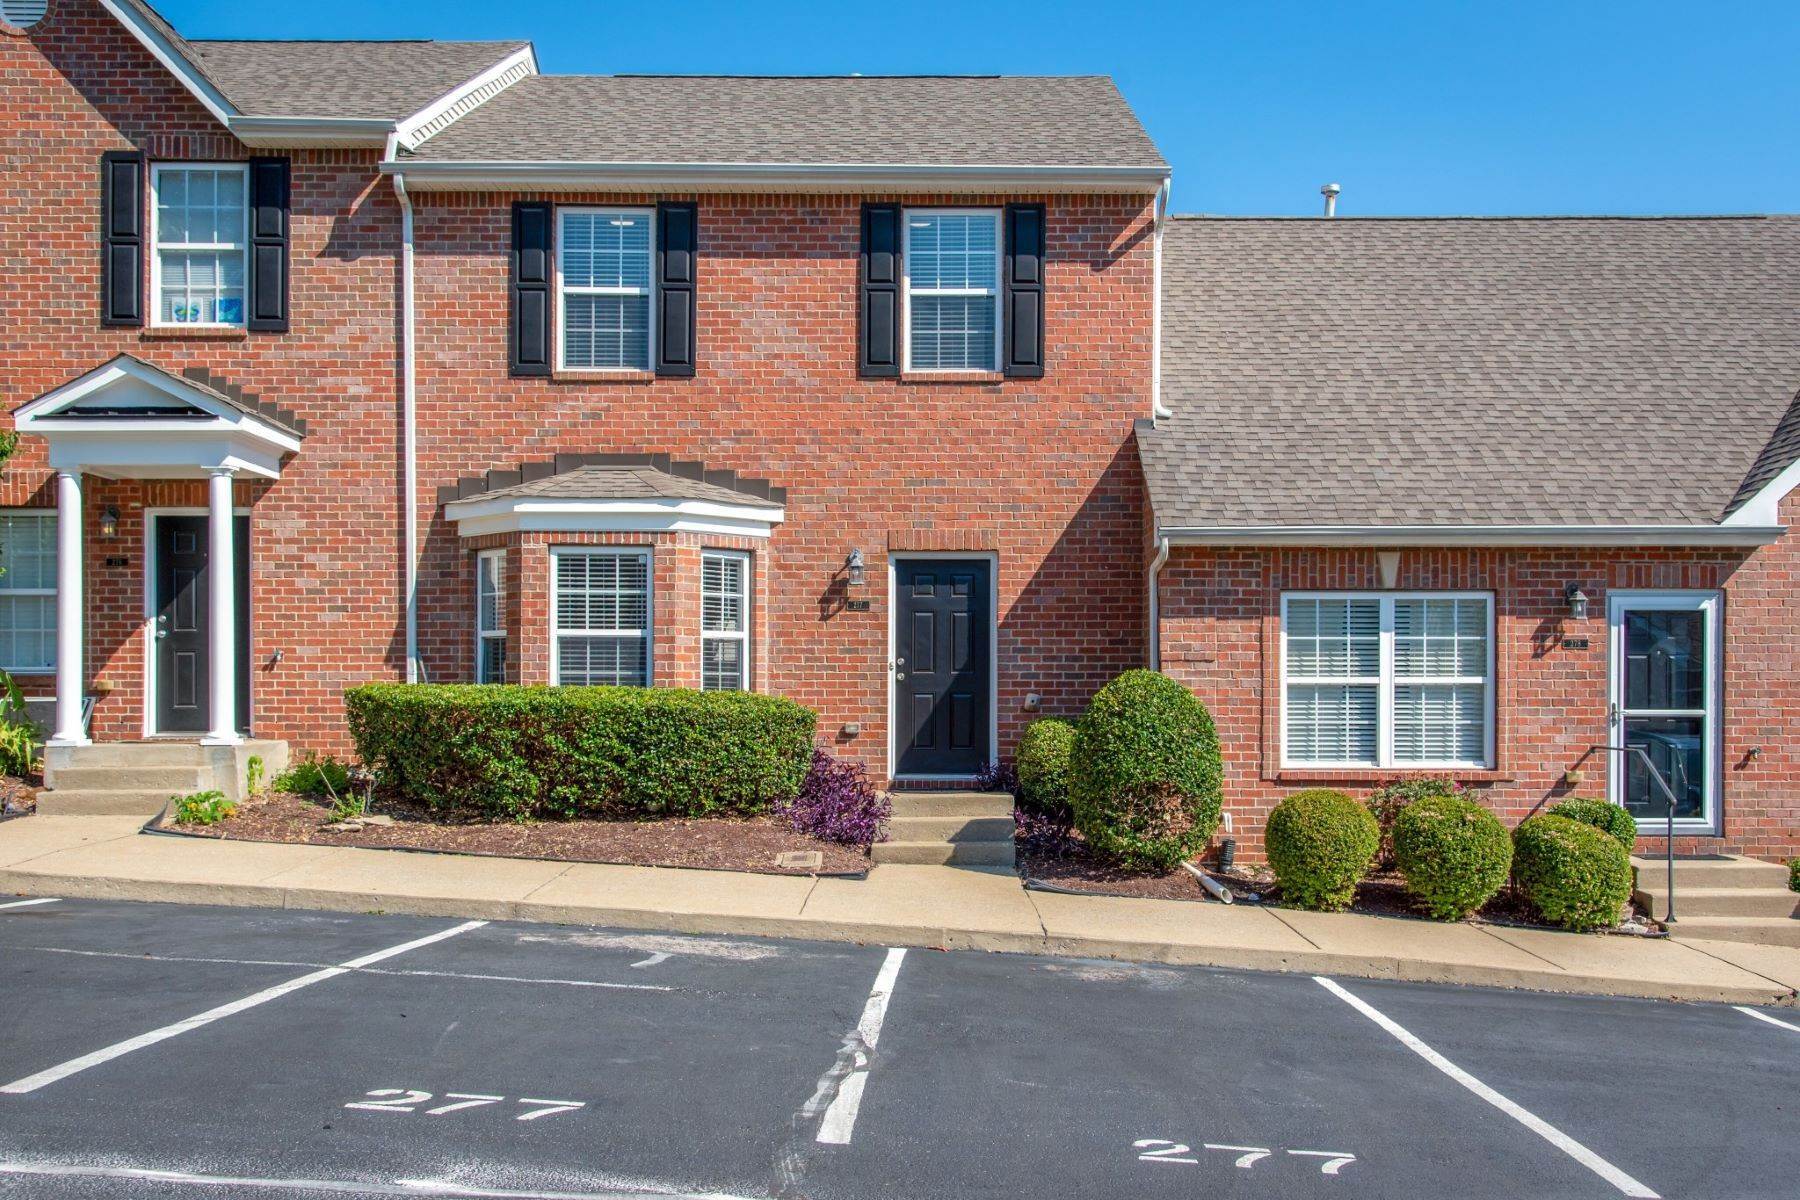 Townhouse for Sale at 1101 Downs Blvd, Franklin, TN, 37064 1101 Downs Blvd, #227 Franklin, Tennessee 37064 United States